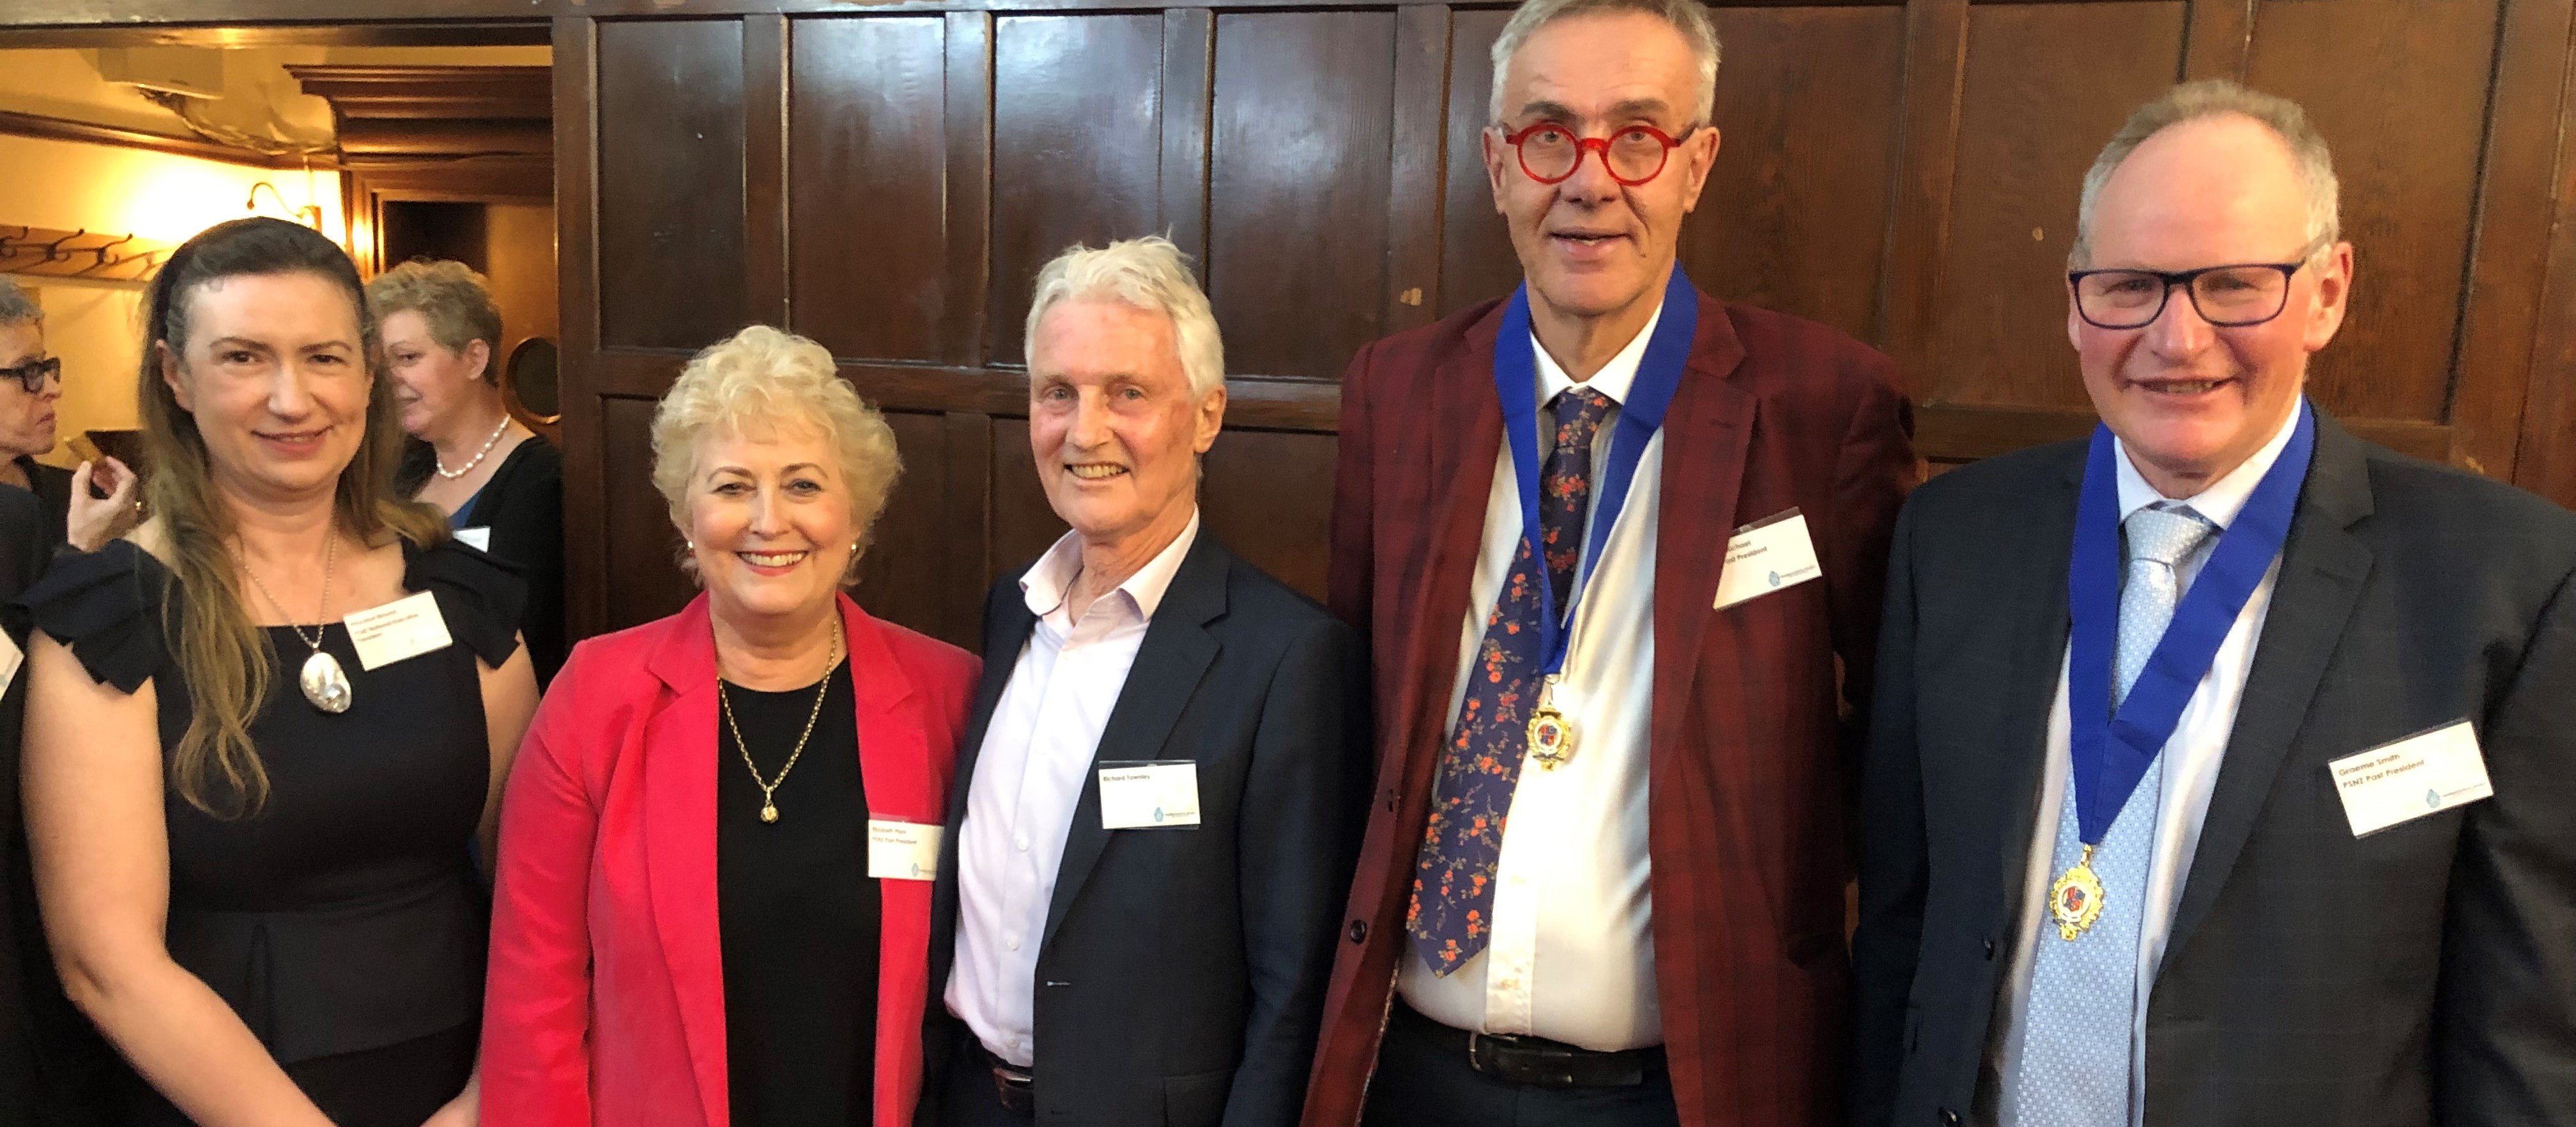 Richard townley with past presidents